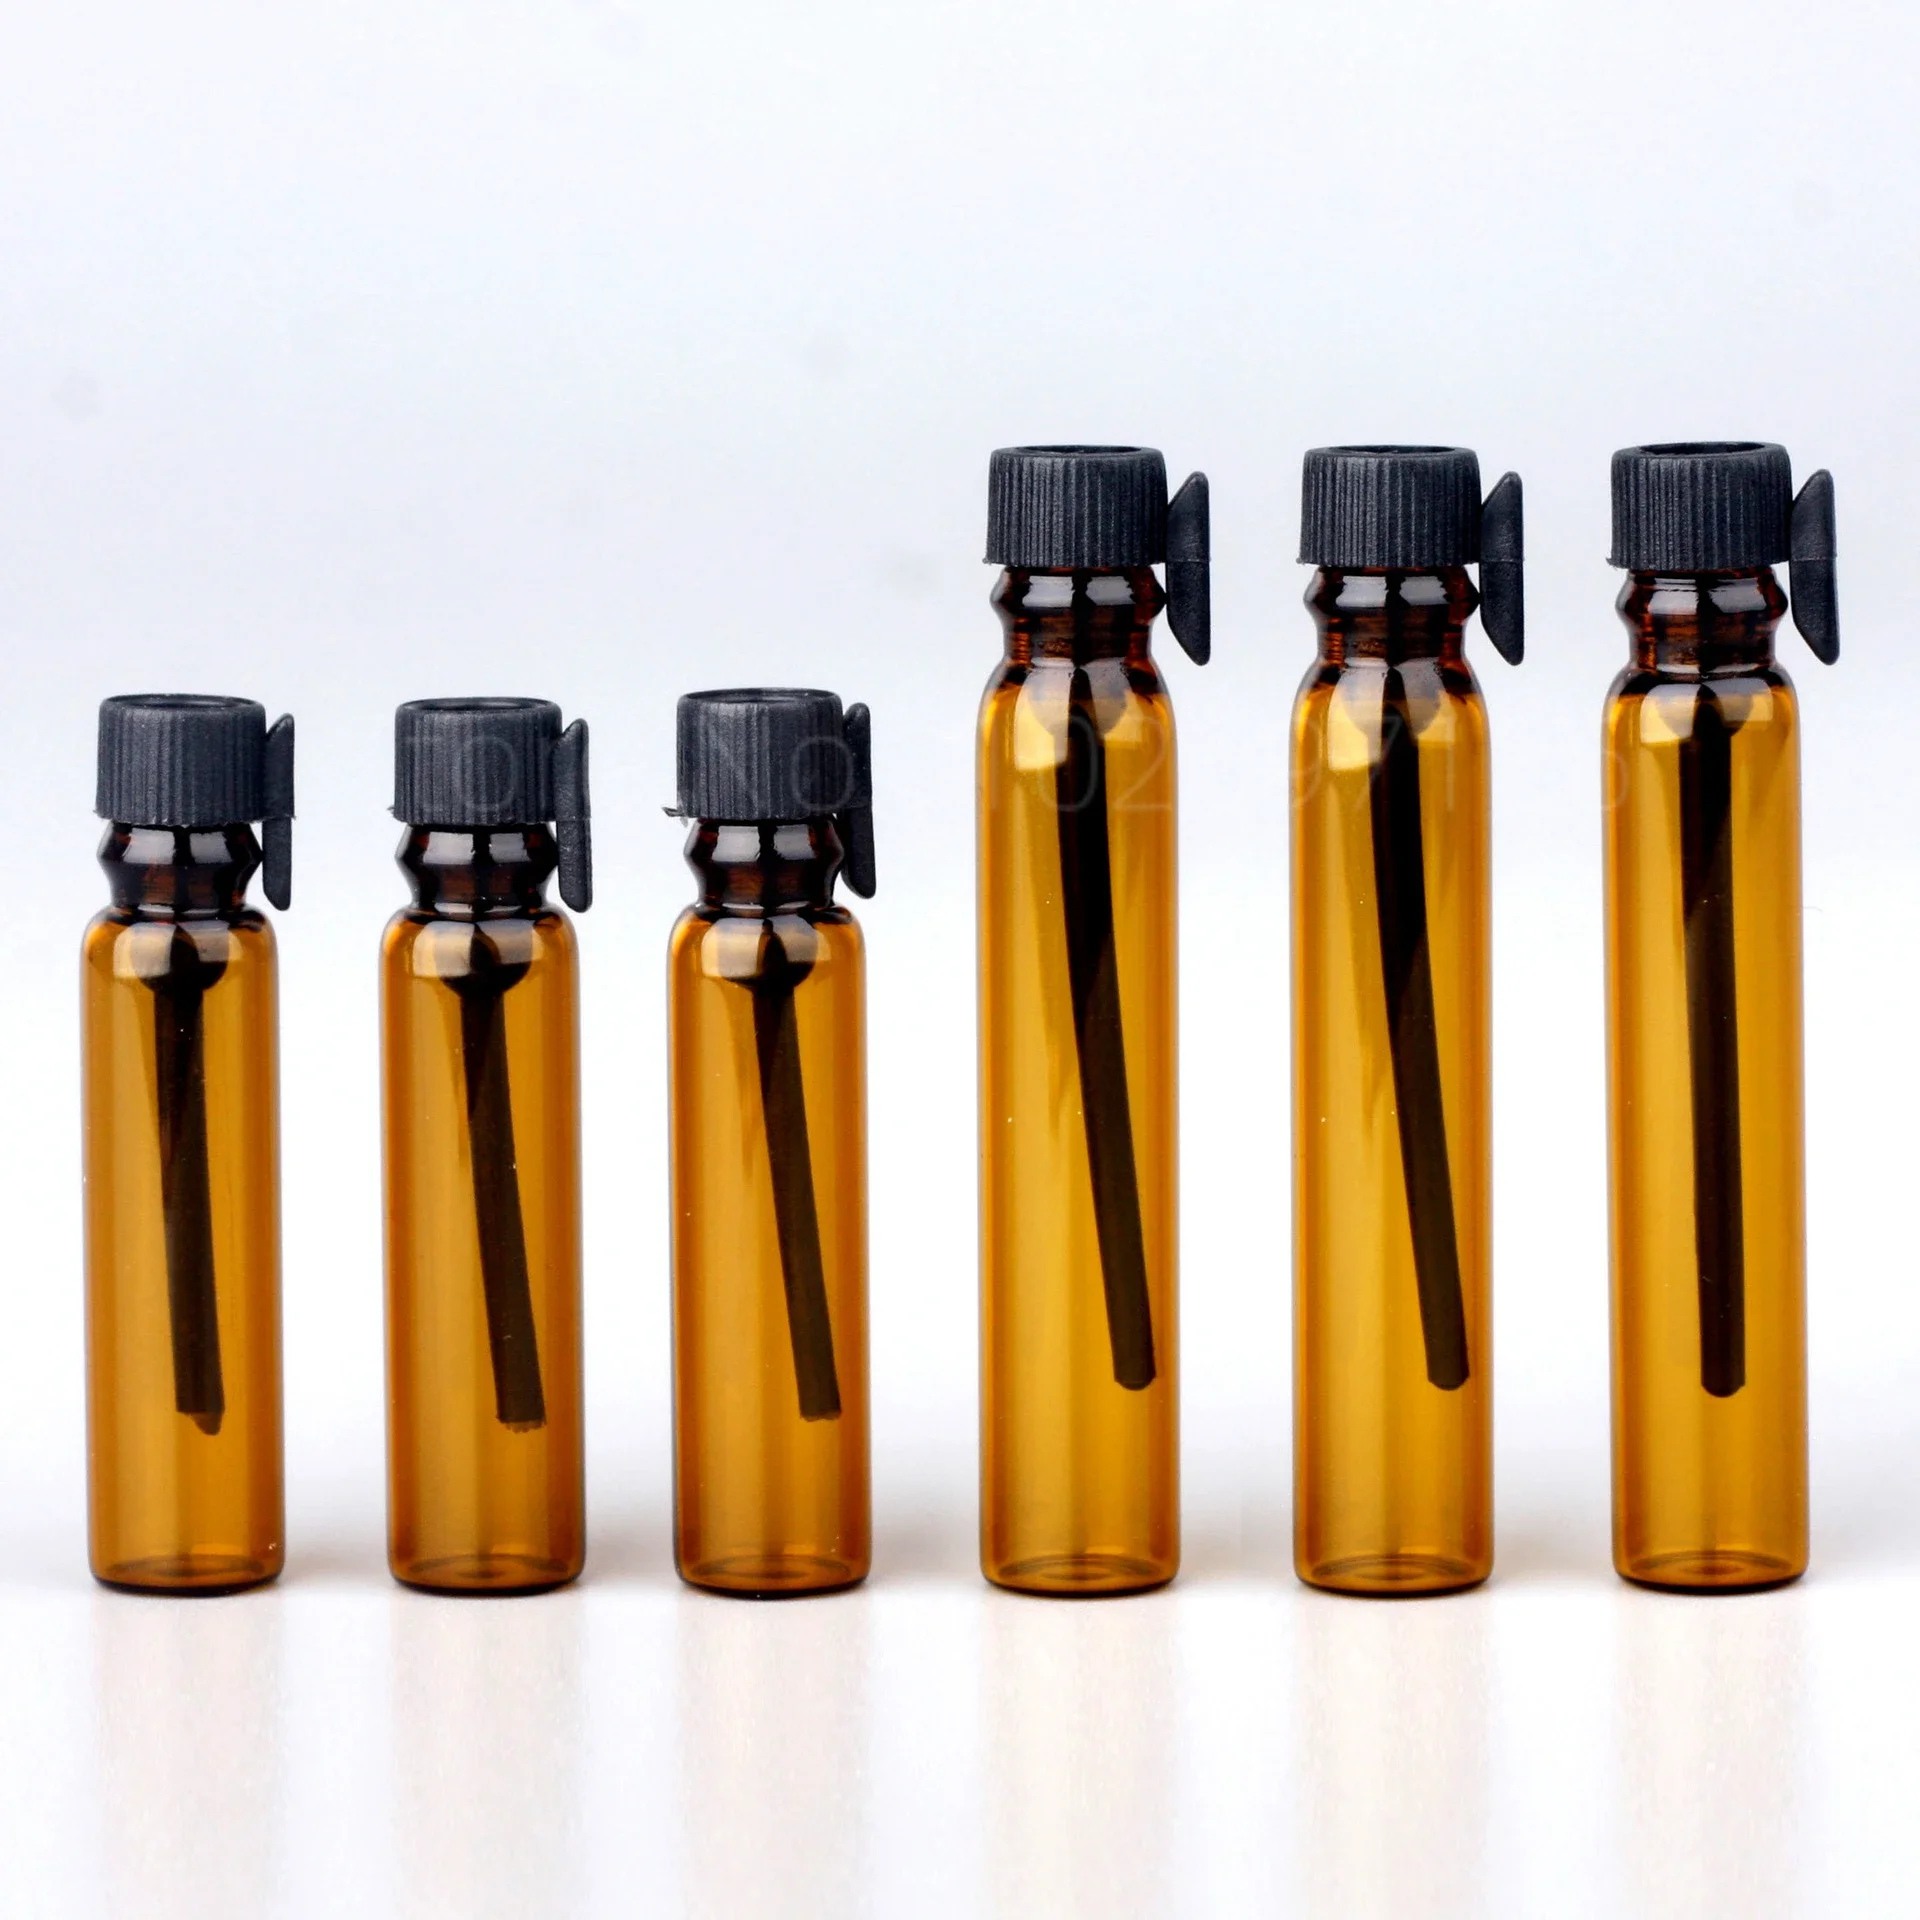 Glass Dropper Bottle Transparent Mini 1ml 2ml Stick Essential Oil with Inner Stopper Sample Trial Use Perfume Sub Bottles Empty 12 pcs lot 30 70mm 30ml glass bottle stopper glass jars storage small bottle container mini glass vials diy craft test tube